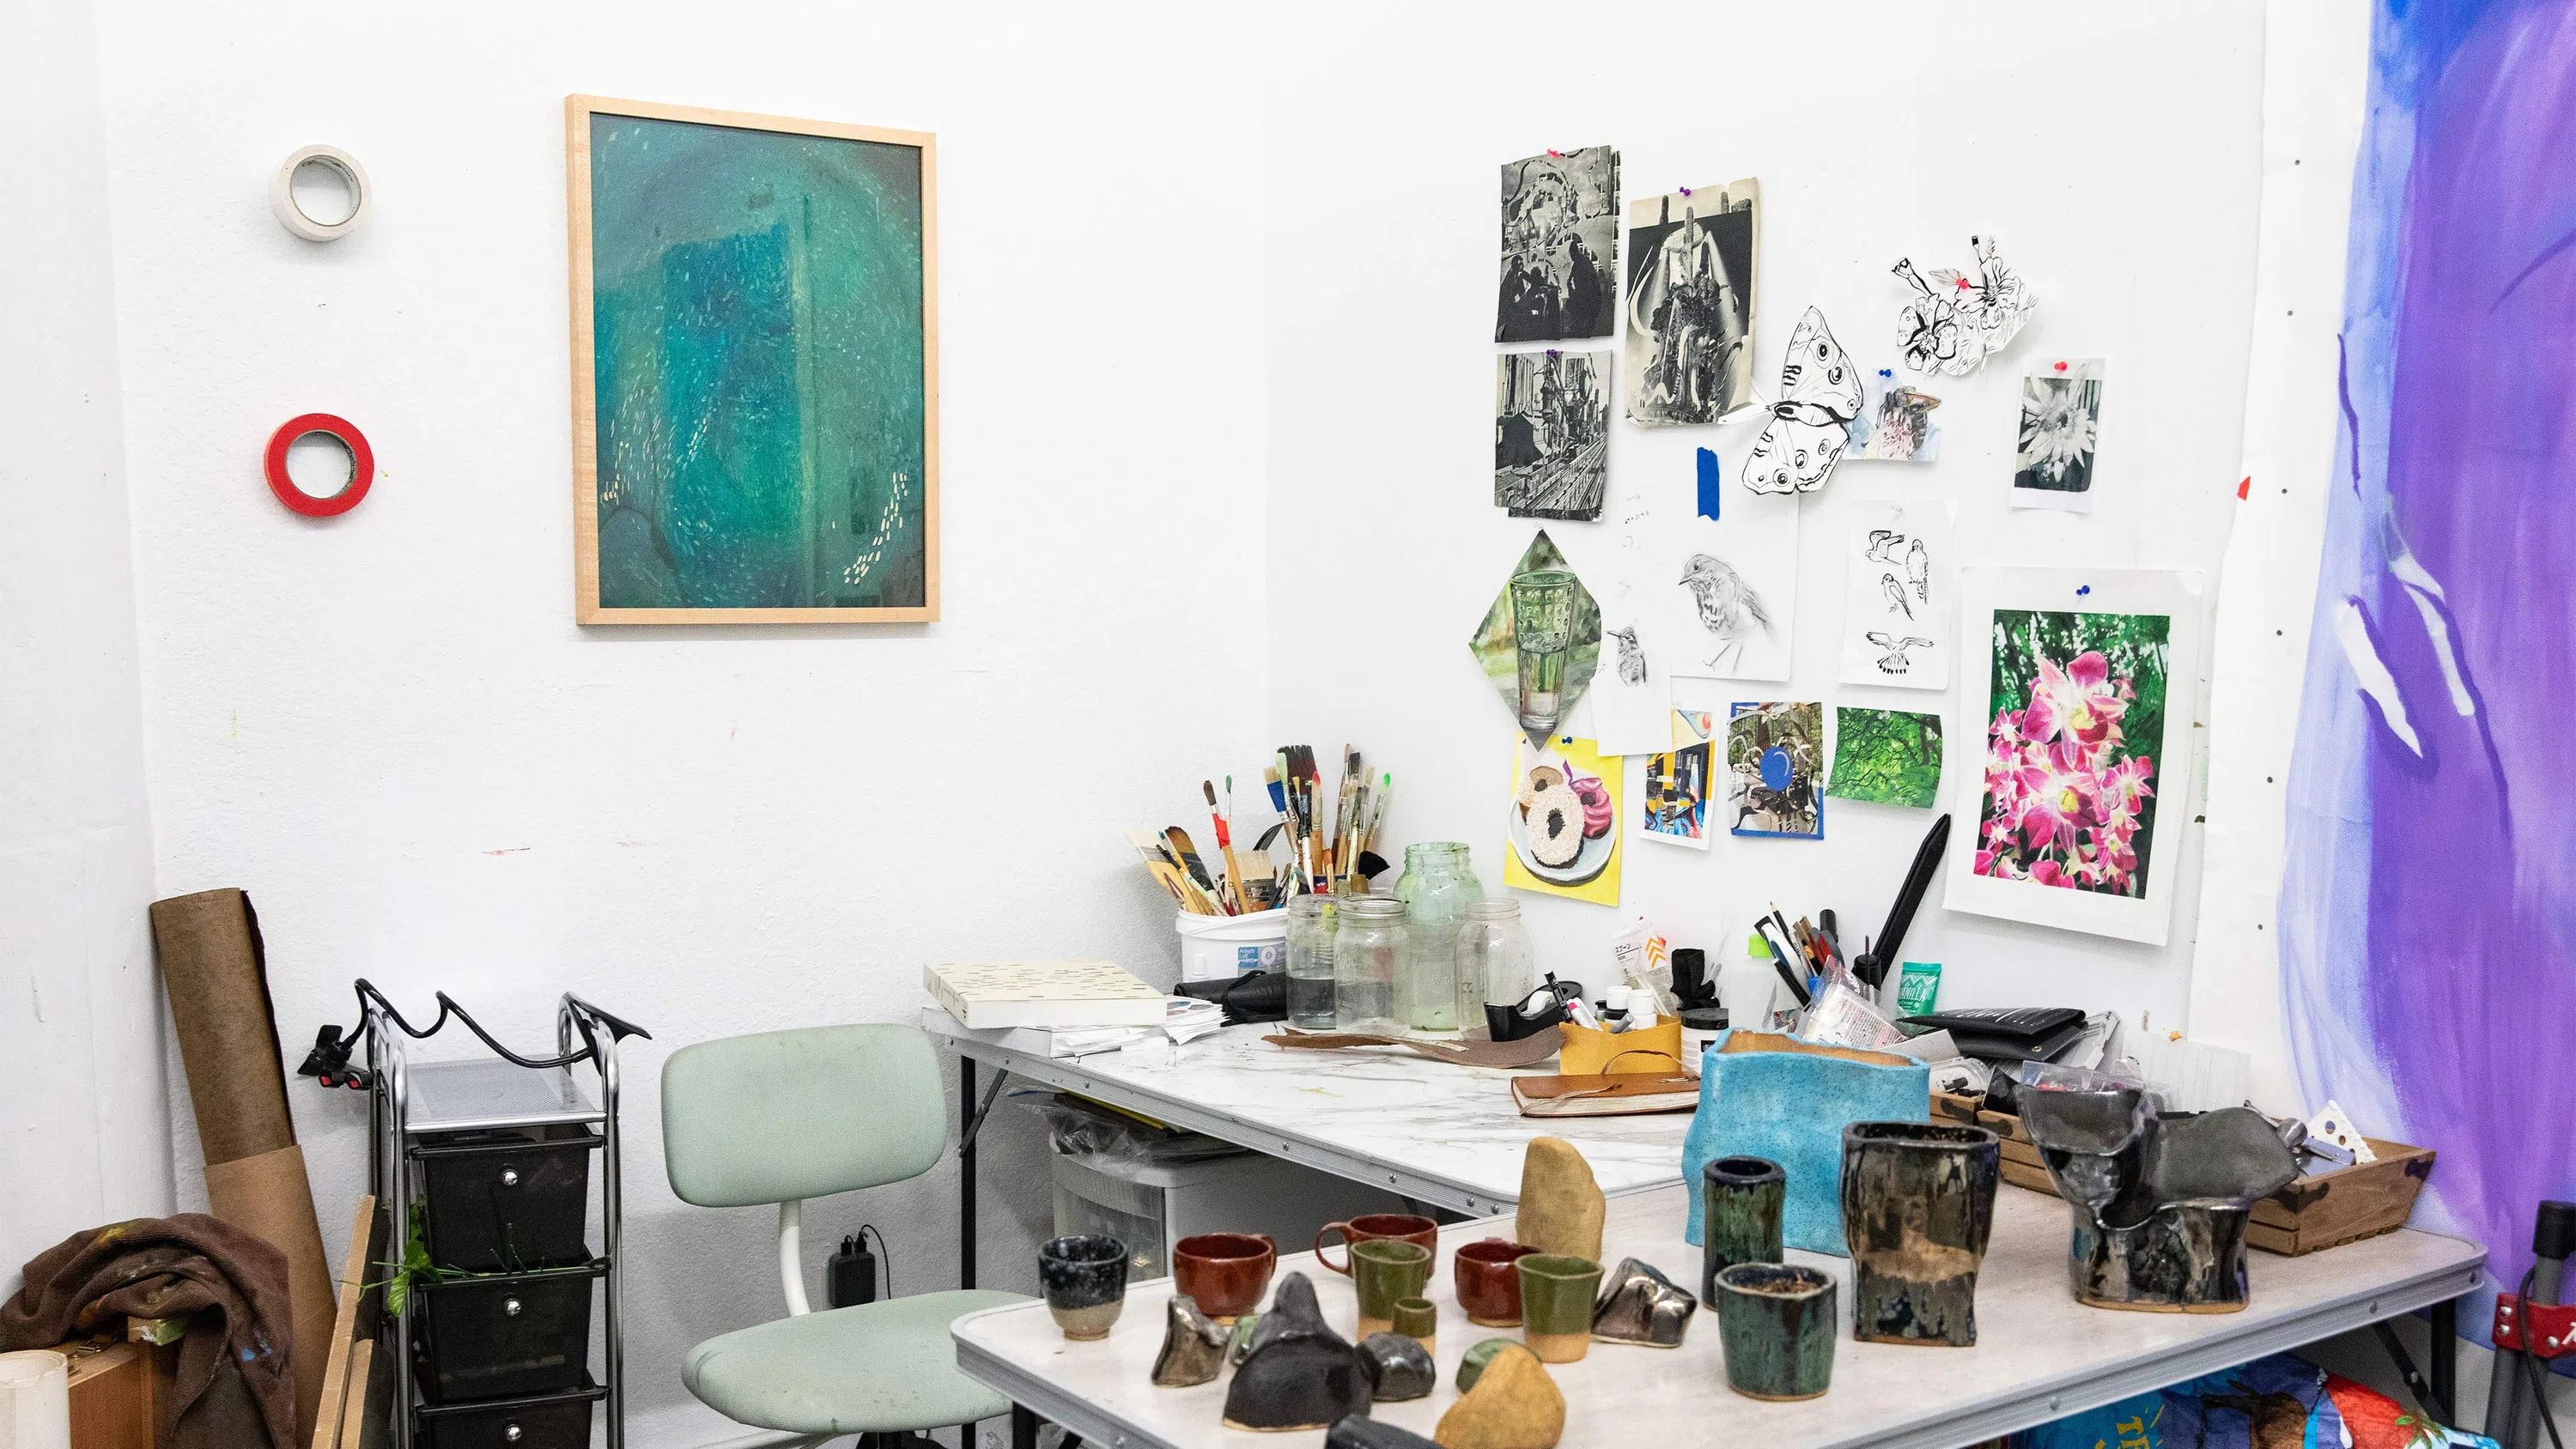 A corner of a grad student’s studio space that has art work pinned to the walls, a chair, L-shaped desk lined with paintbrushes and ceramics.